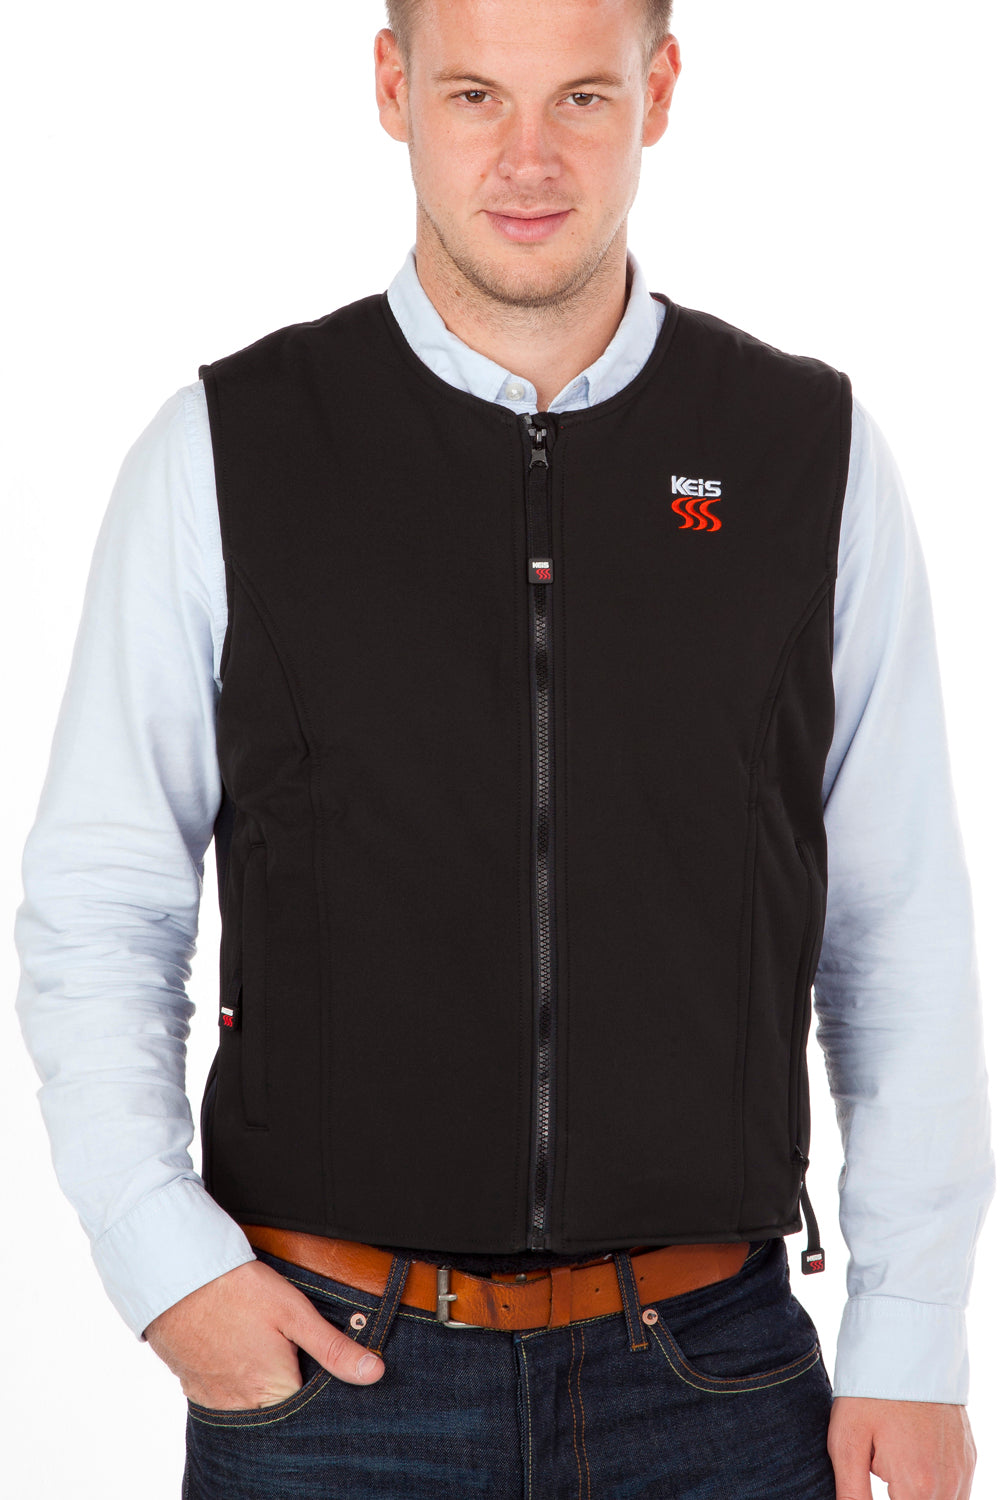 Keis heated vest is light-weight and very warm